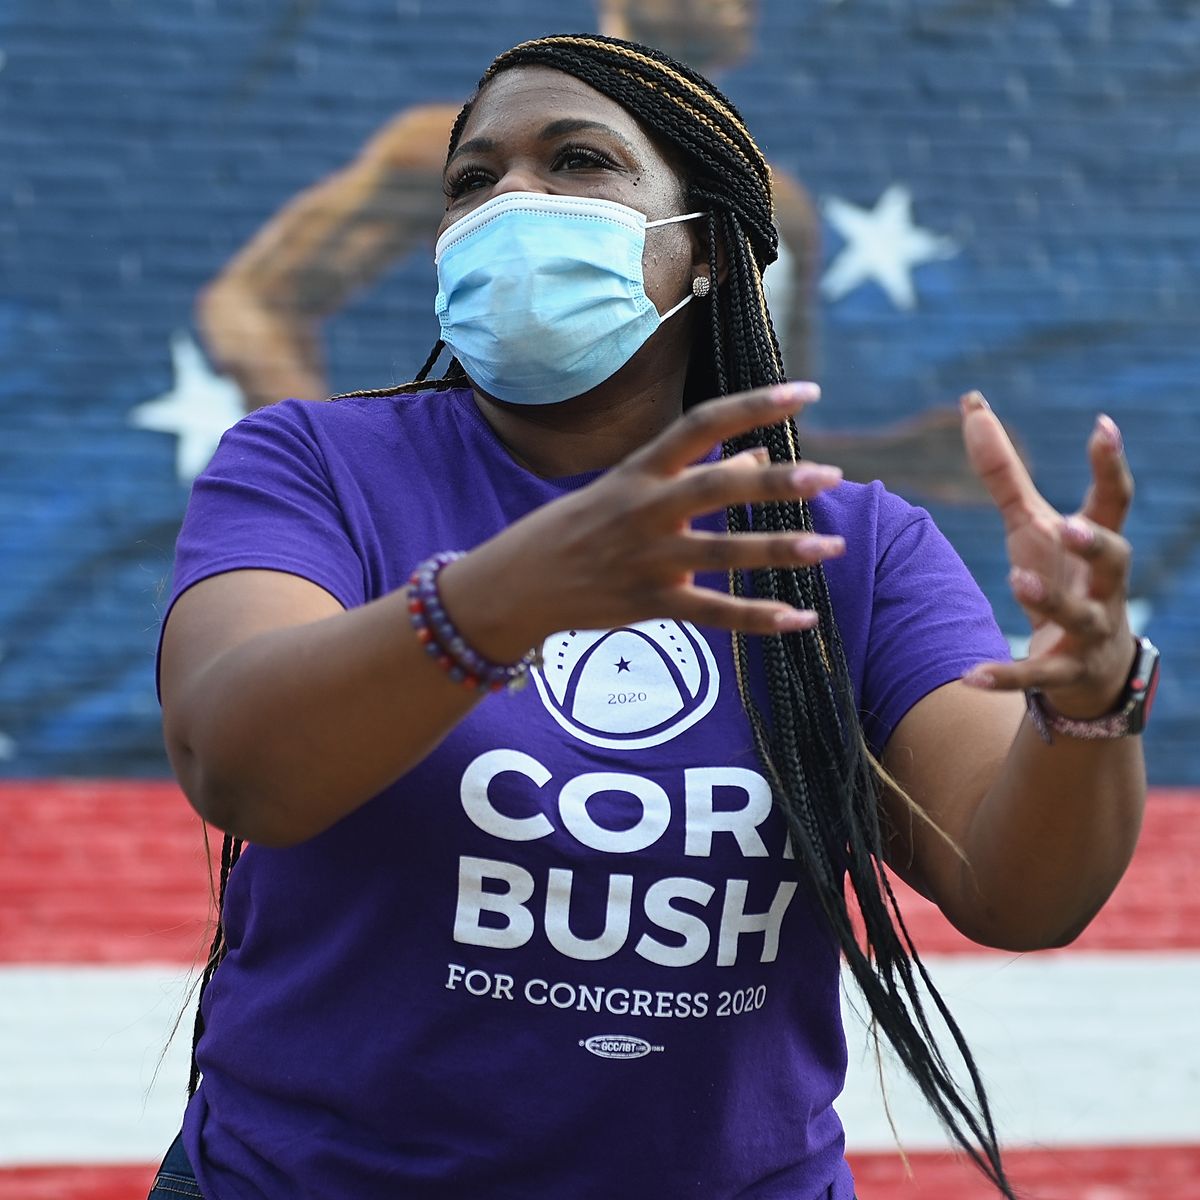 st louis, mo   august 03 missouri democratic congressional candidate cori bush speaks to supporters during a canvassing event on august 3, 2020 in st louis, missouri bush, an activist backed by the progressive group justice democrats, is looking to defeat 10 term incumbent rep william lacy clay d mo in tuesdays election photo by michael b thomasgetty images